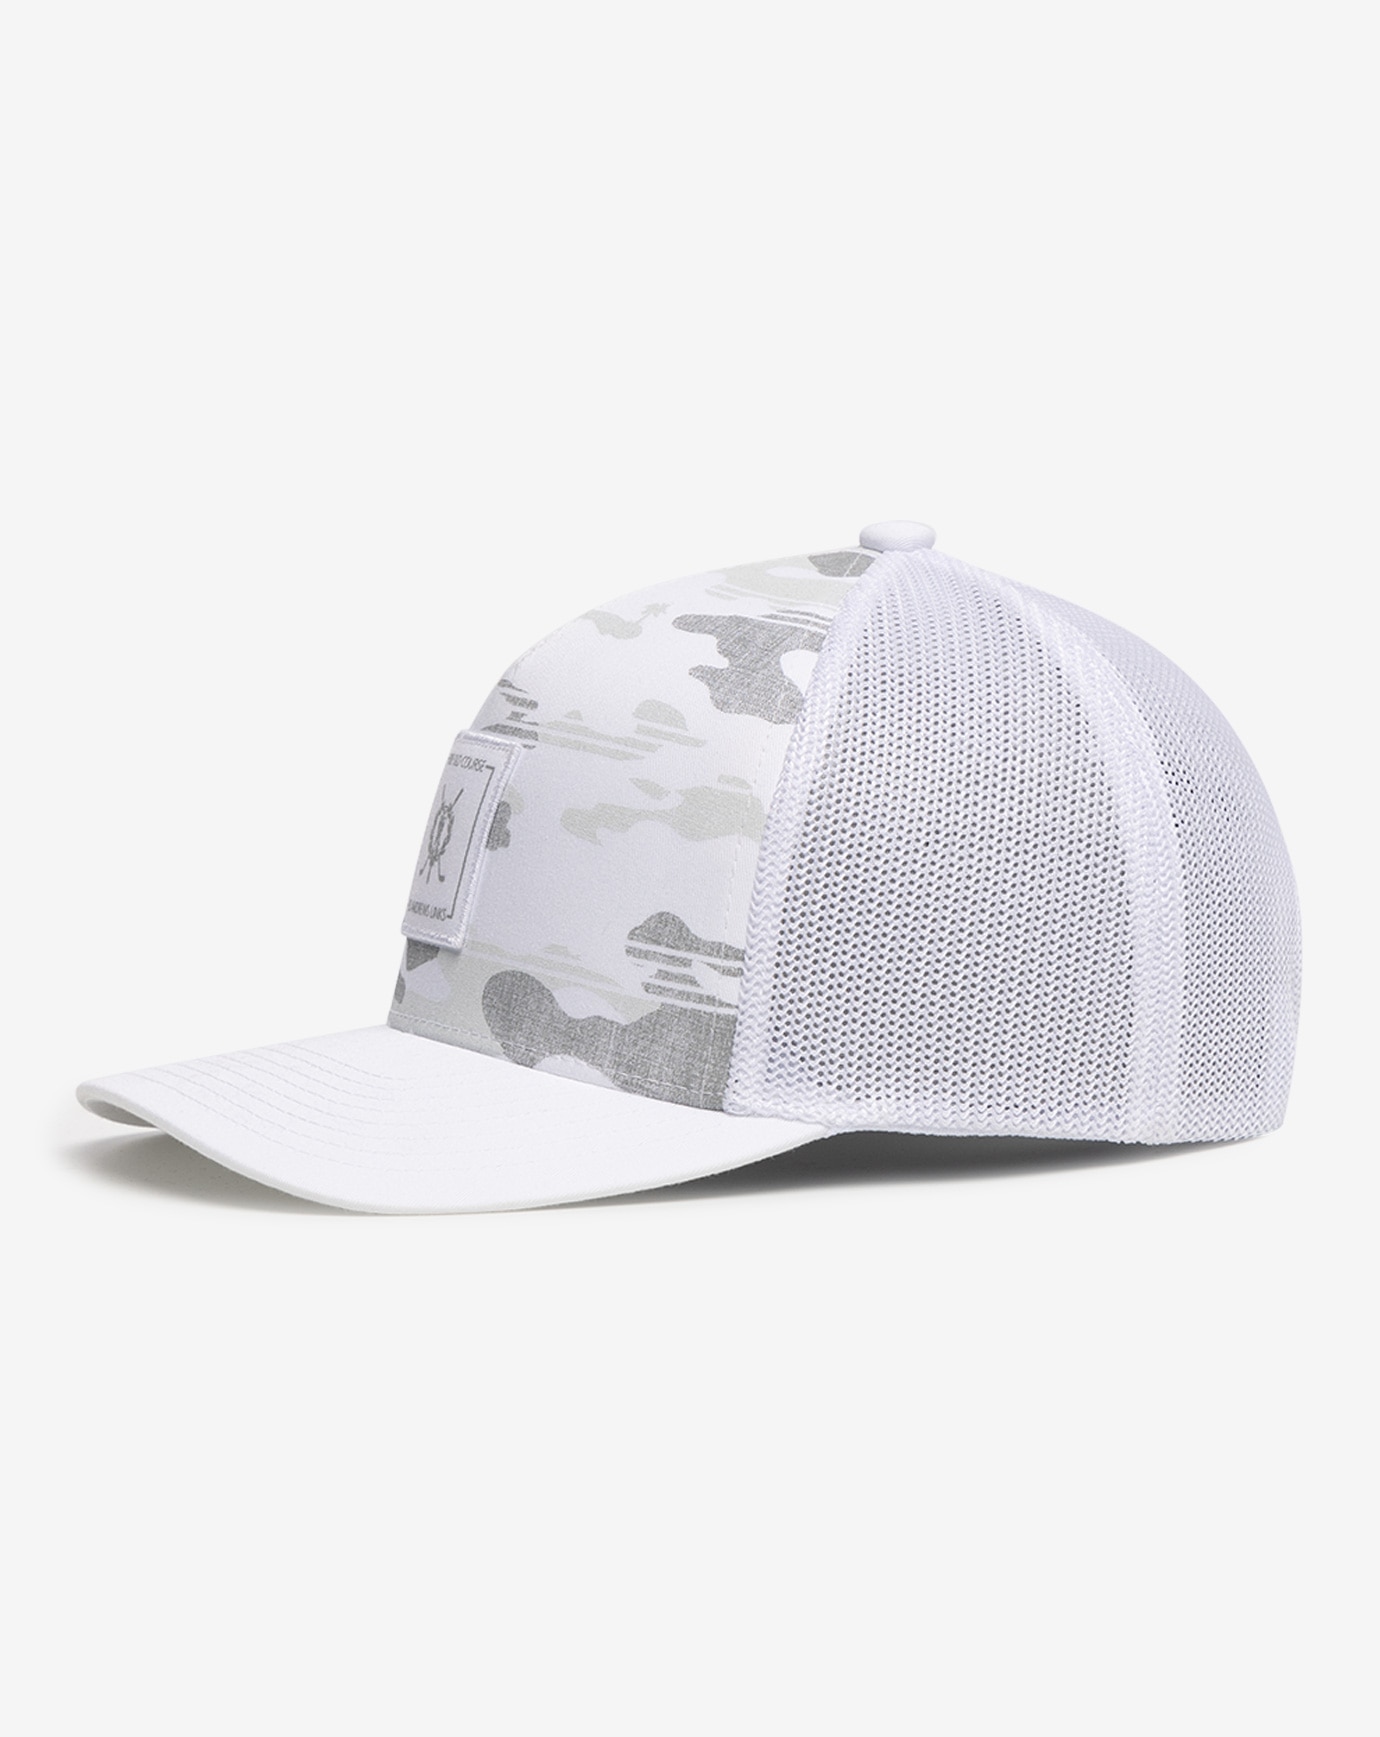 ST ANDREWS EXPEDITION SNAPBACK HAT Image Thumbnail 2